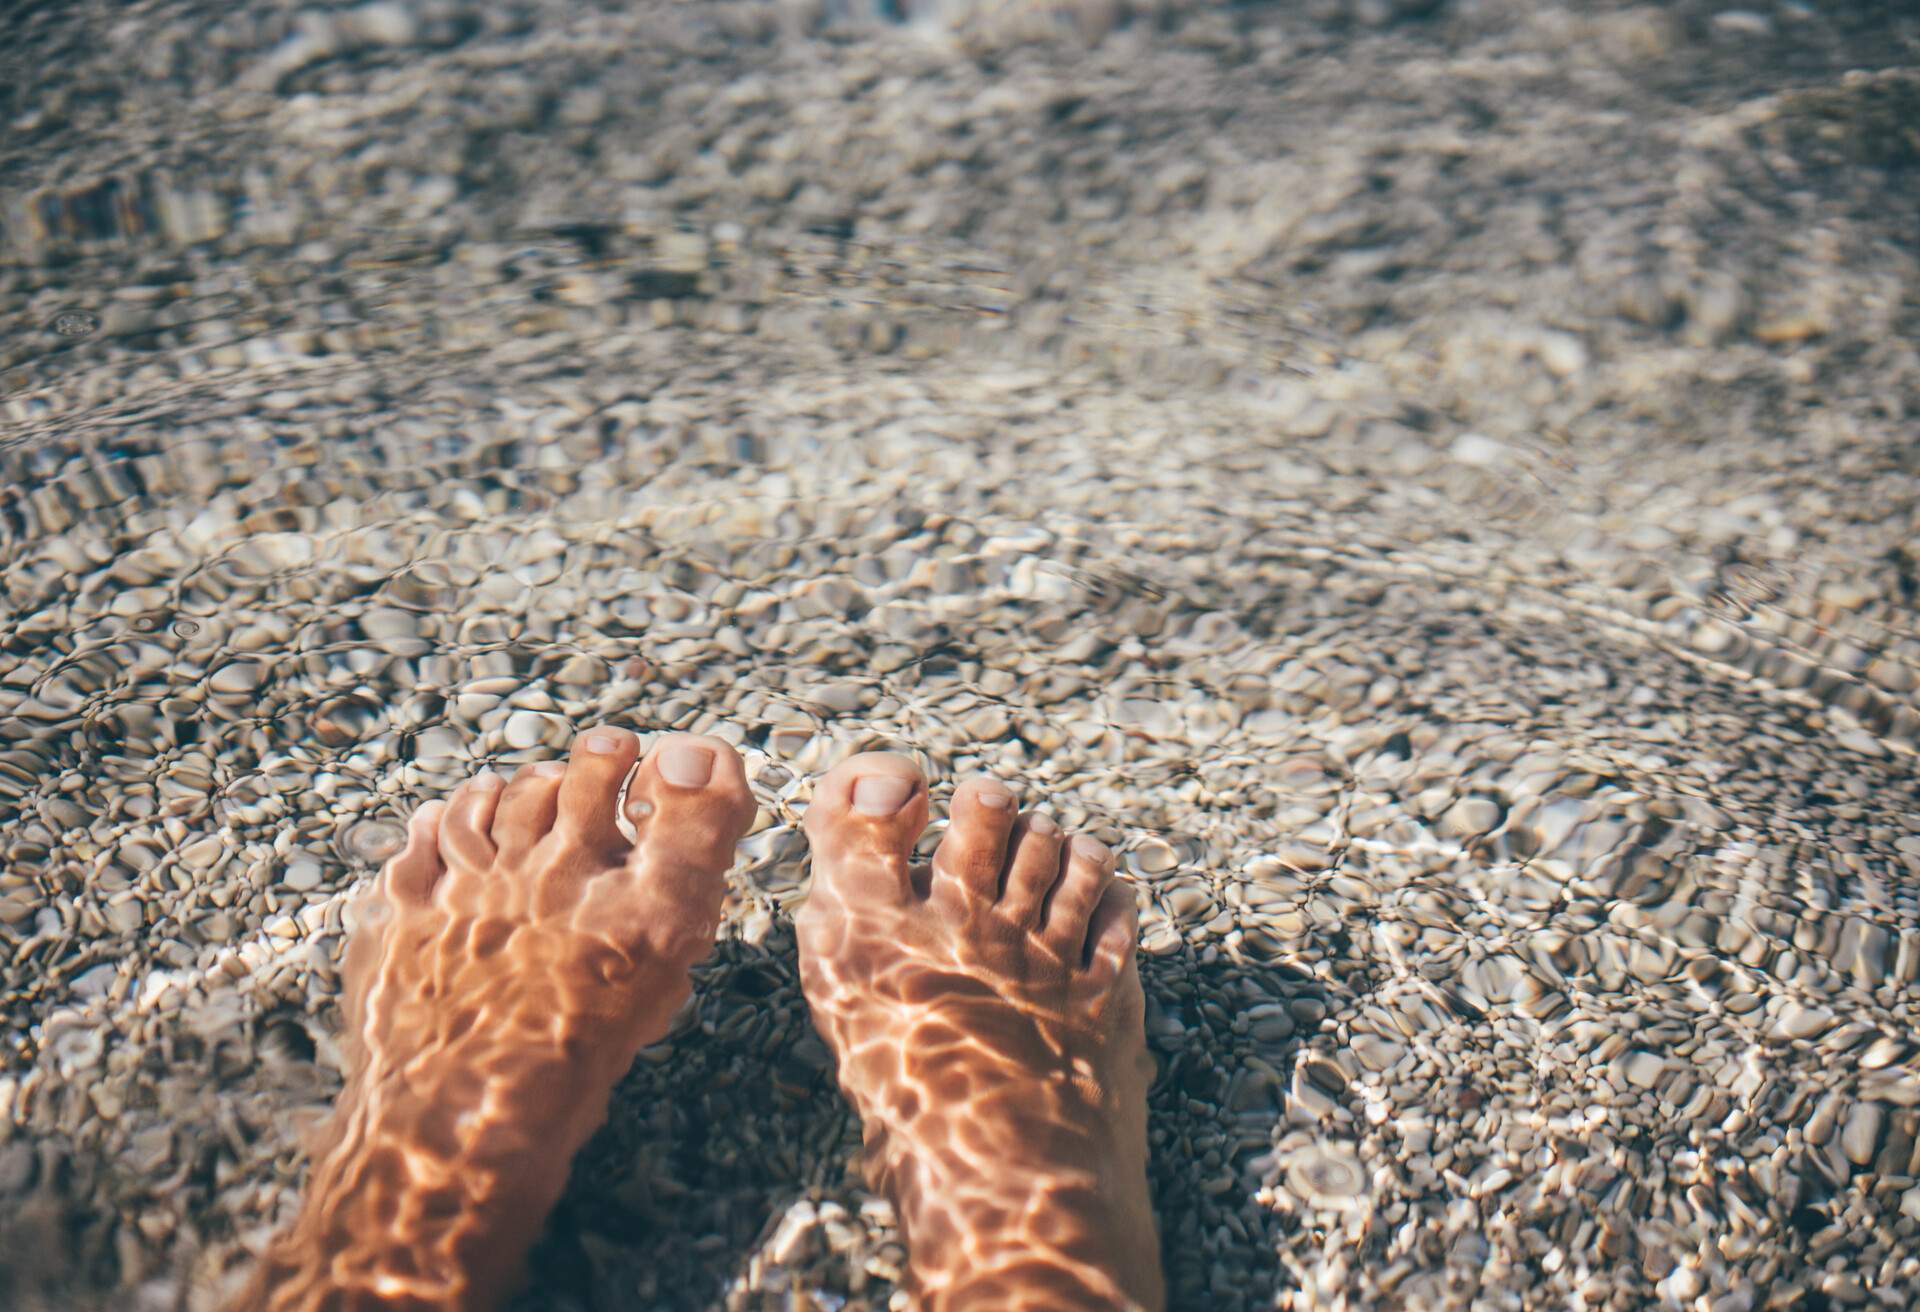 A woman's feet submerged in a crystal-clear sea with a pebbly bottom.